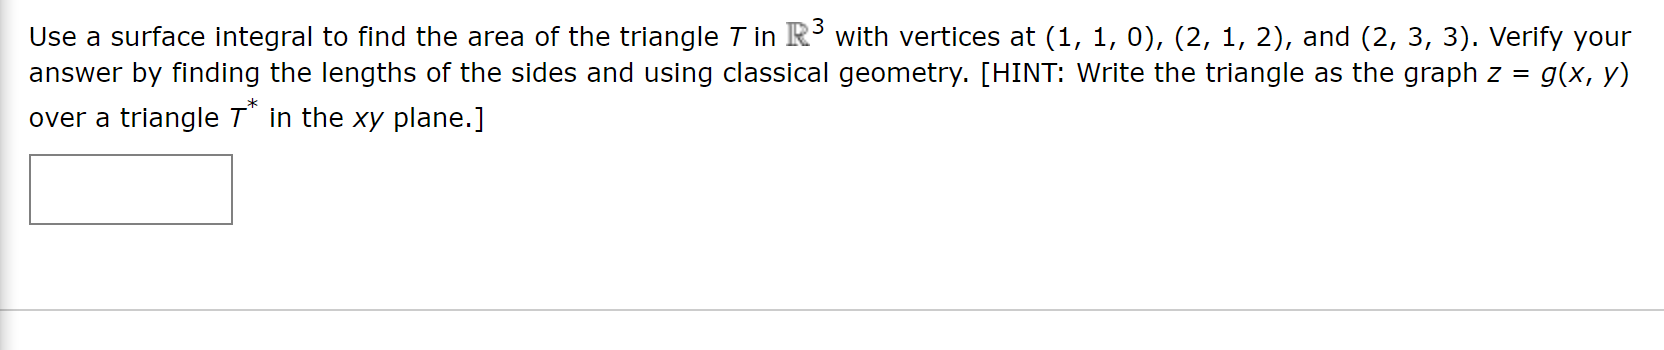 Use a surface integral to find the area of the triangle T in R with vertices at (1, 1, 0), (2, 1, 2), and (2, 3, 3). Verify your
answer by finding the lengths of the sides and using classical geometry. [HINT: Write the triangle as the graph z = g(x, y)
over a triangle T" in the xy plane.]
